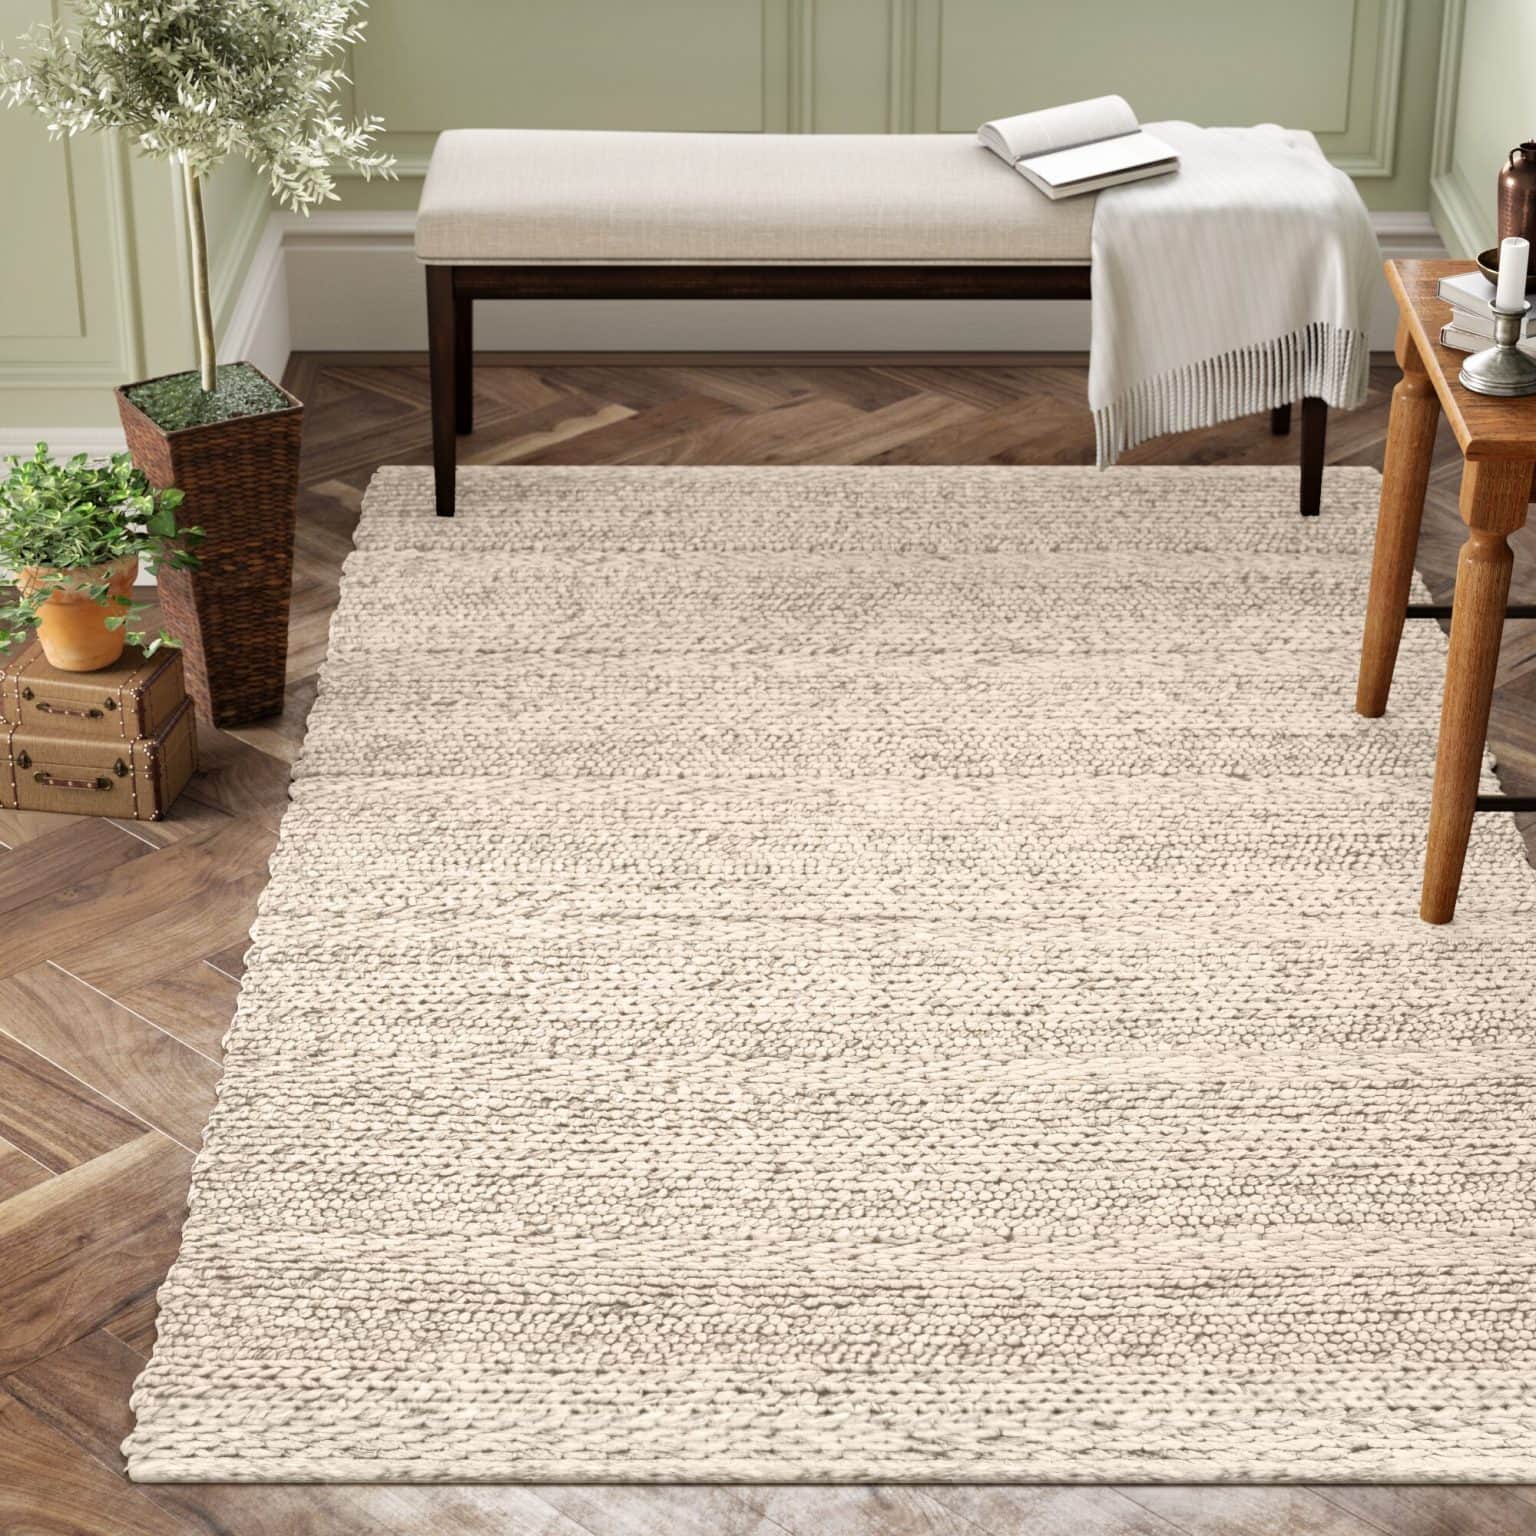 7 A Thick Soft Handwoven Wool Rug 1536x1536 